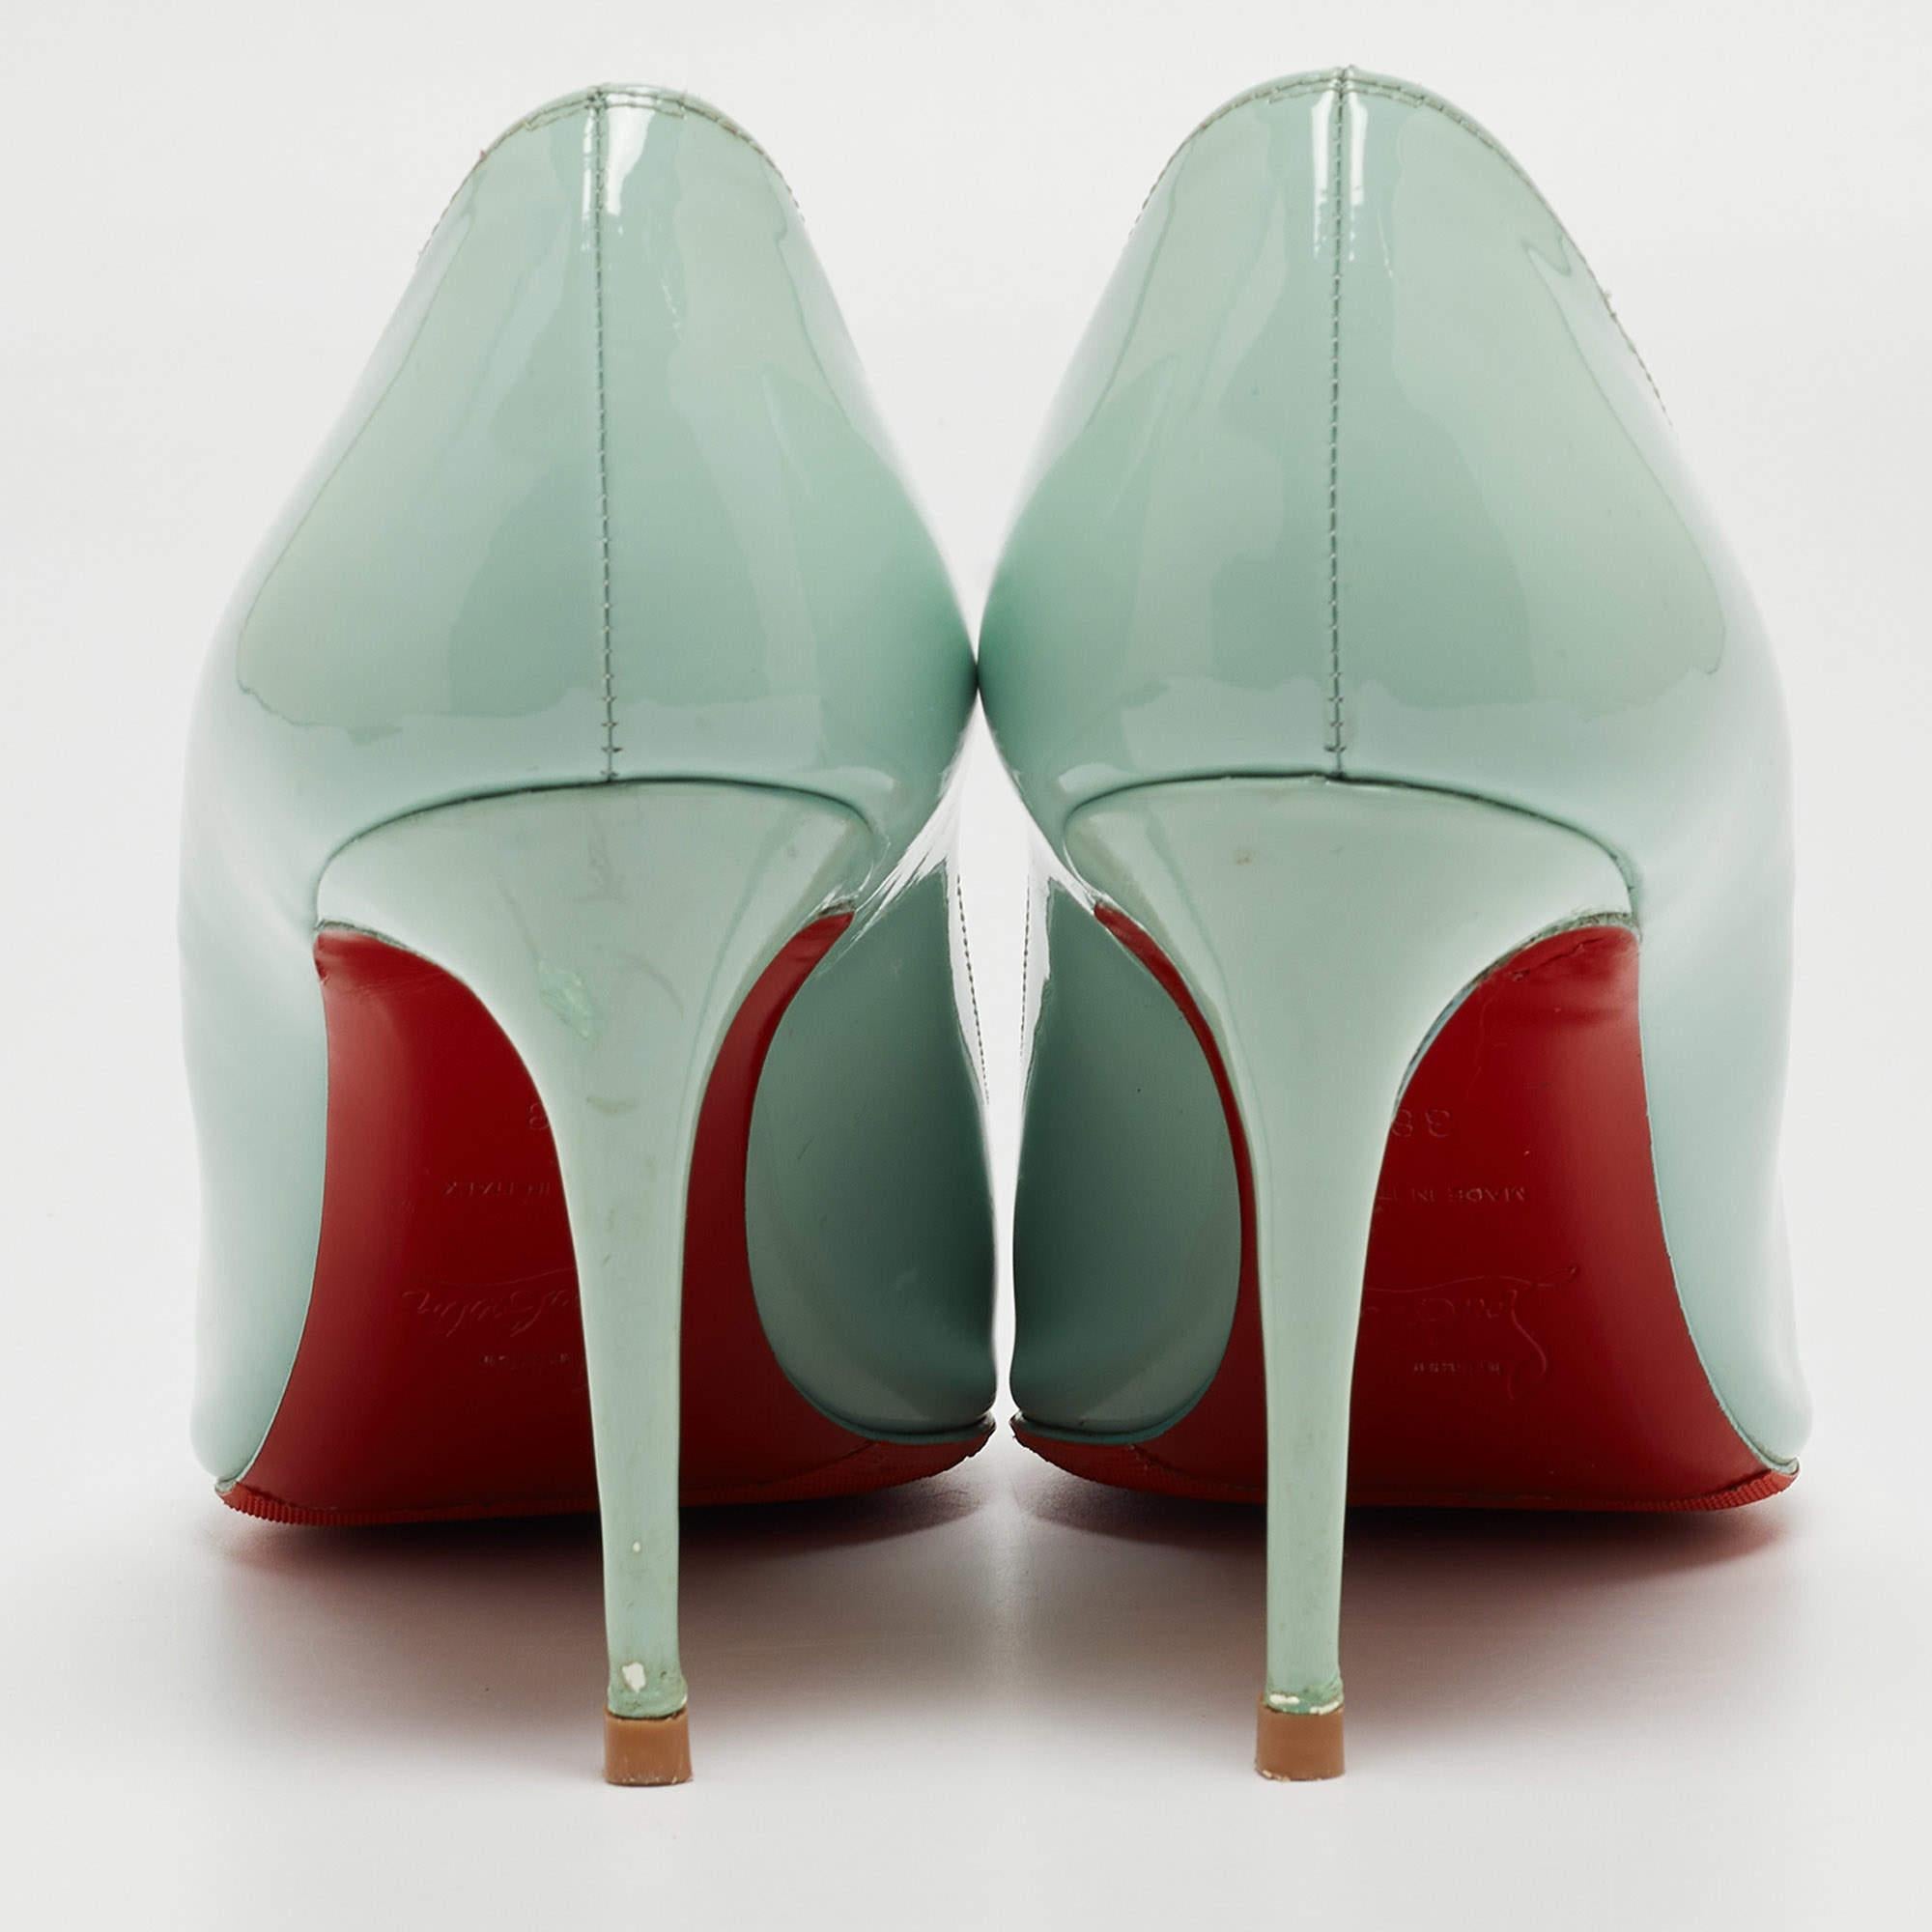 Christian Louboutin Light Green Patent Leather Pigalle Pointed Toe Pumps Size 38 2